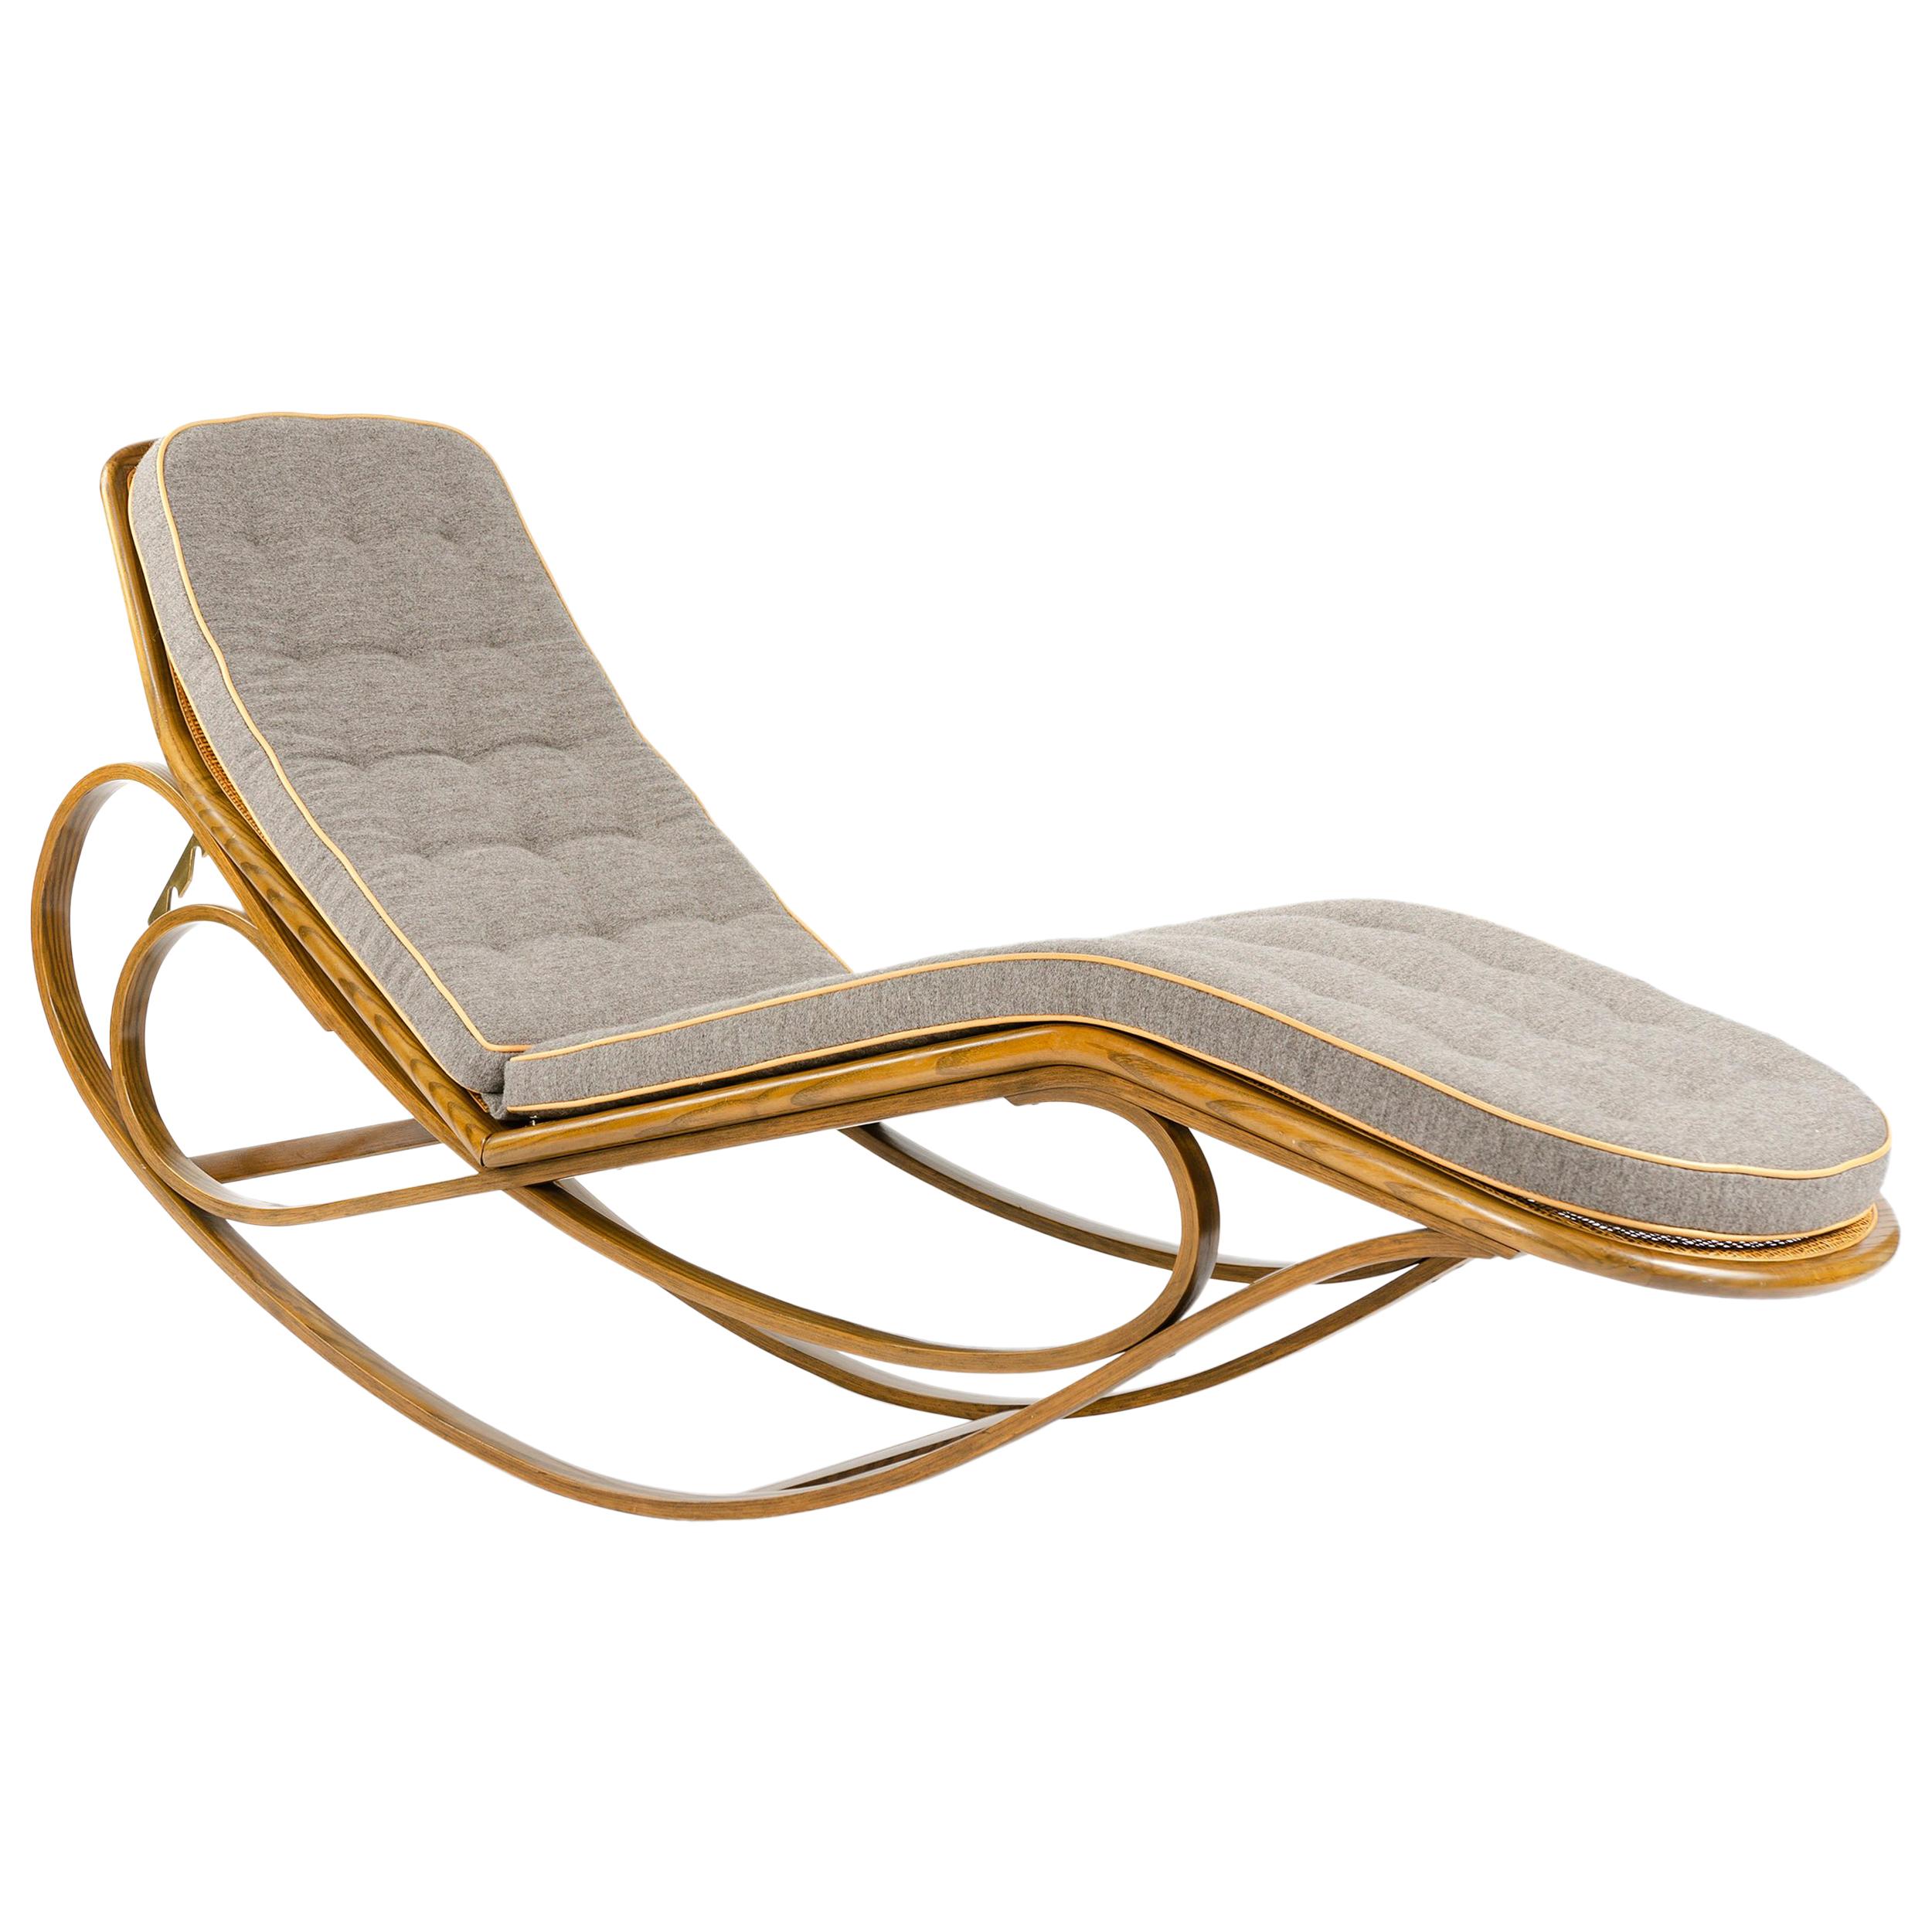 1940s Rocking Chaise Lounge by Edward Wormley for Dunbar For Sale